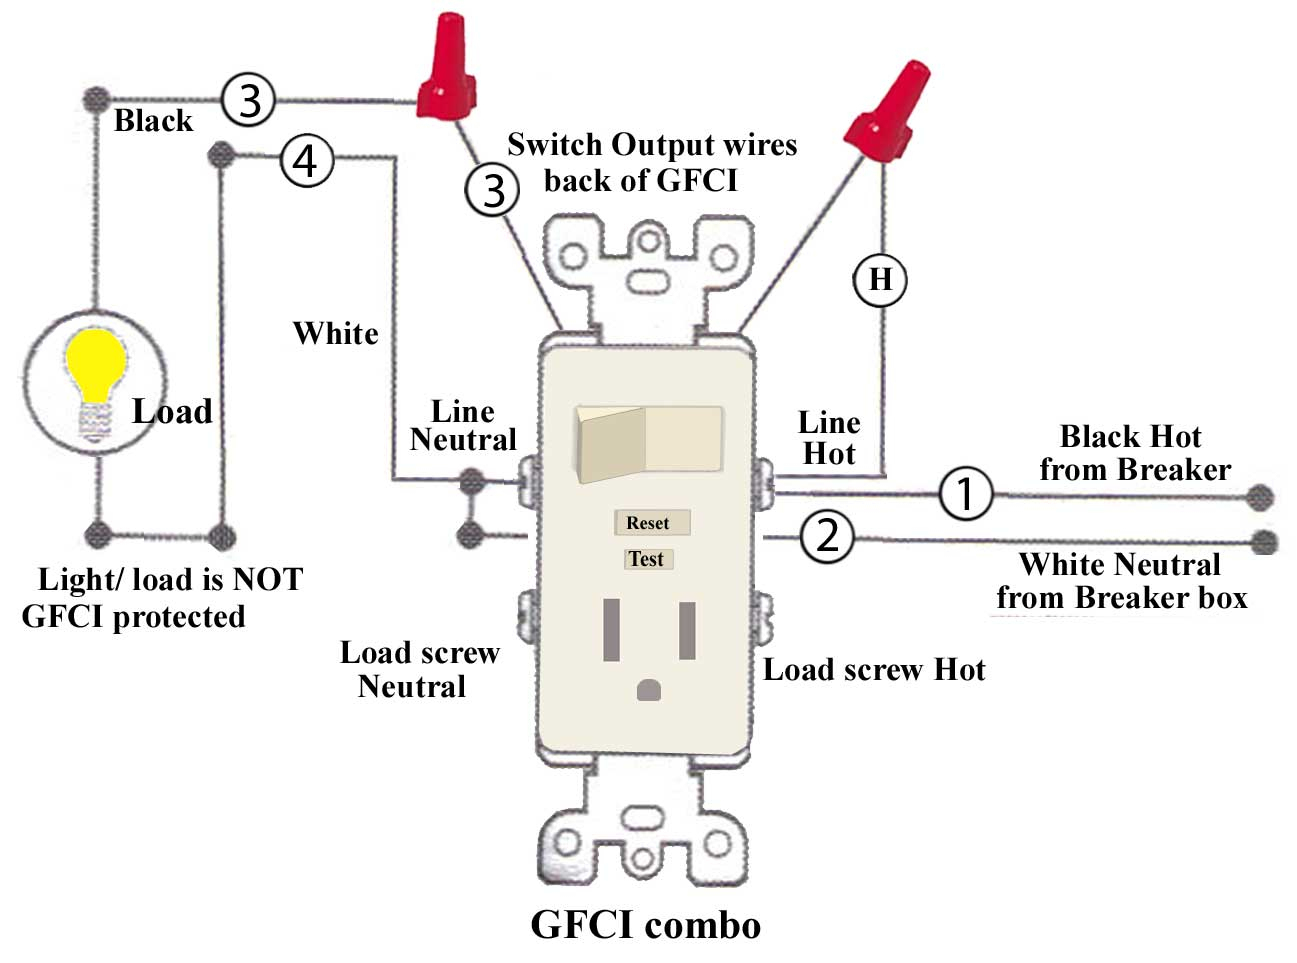 Diagram Wiring Multiple Gfci Outlets Wiring Diagram Full Version Hd Quality Wiring Diagram Siadownload Valoris It Fr